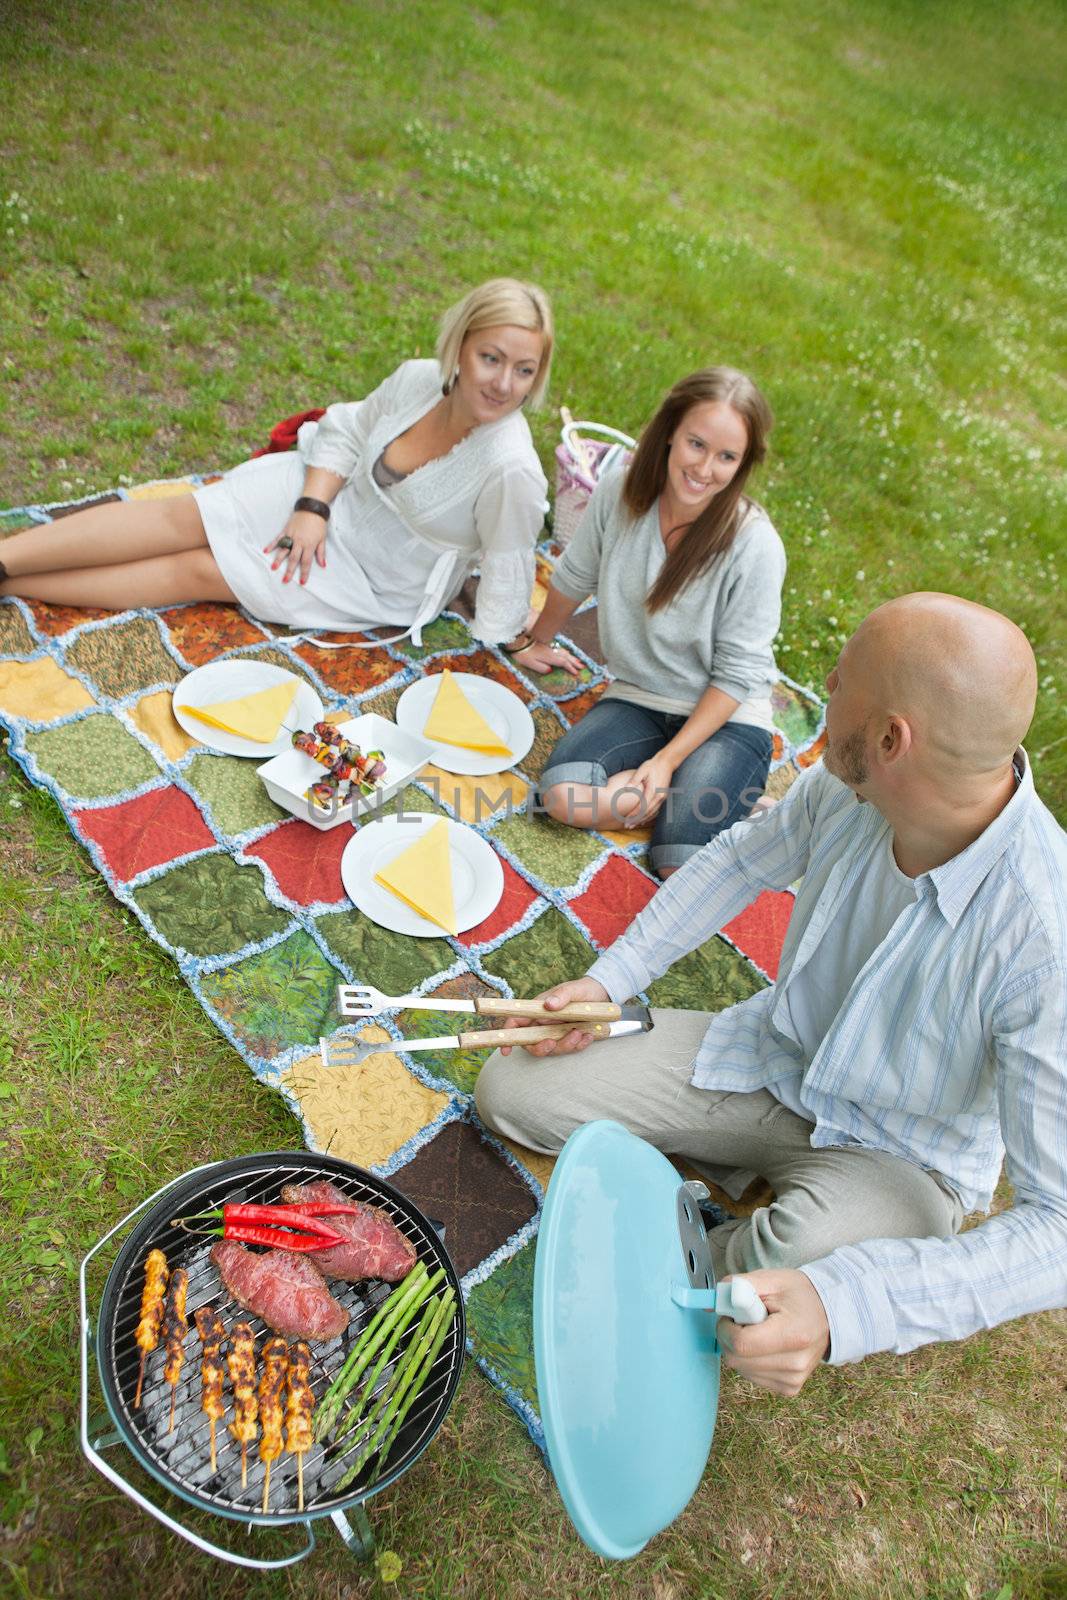 Friends Eating Food At An Outdoor Picnic by leaf